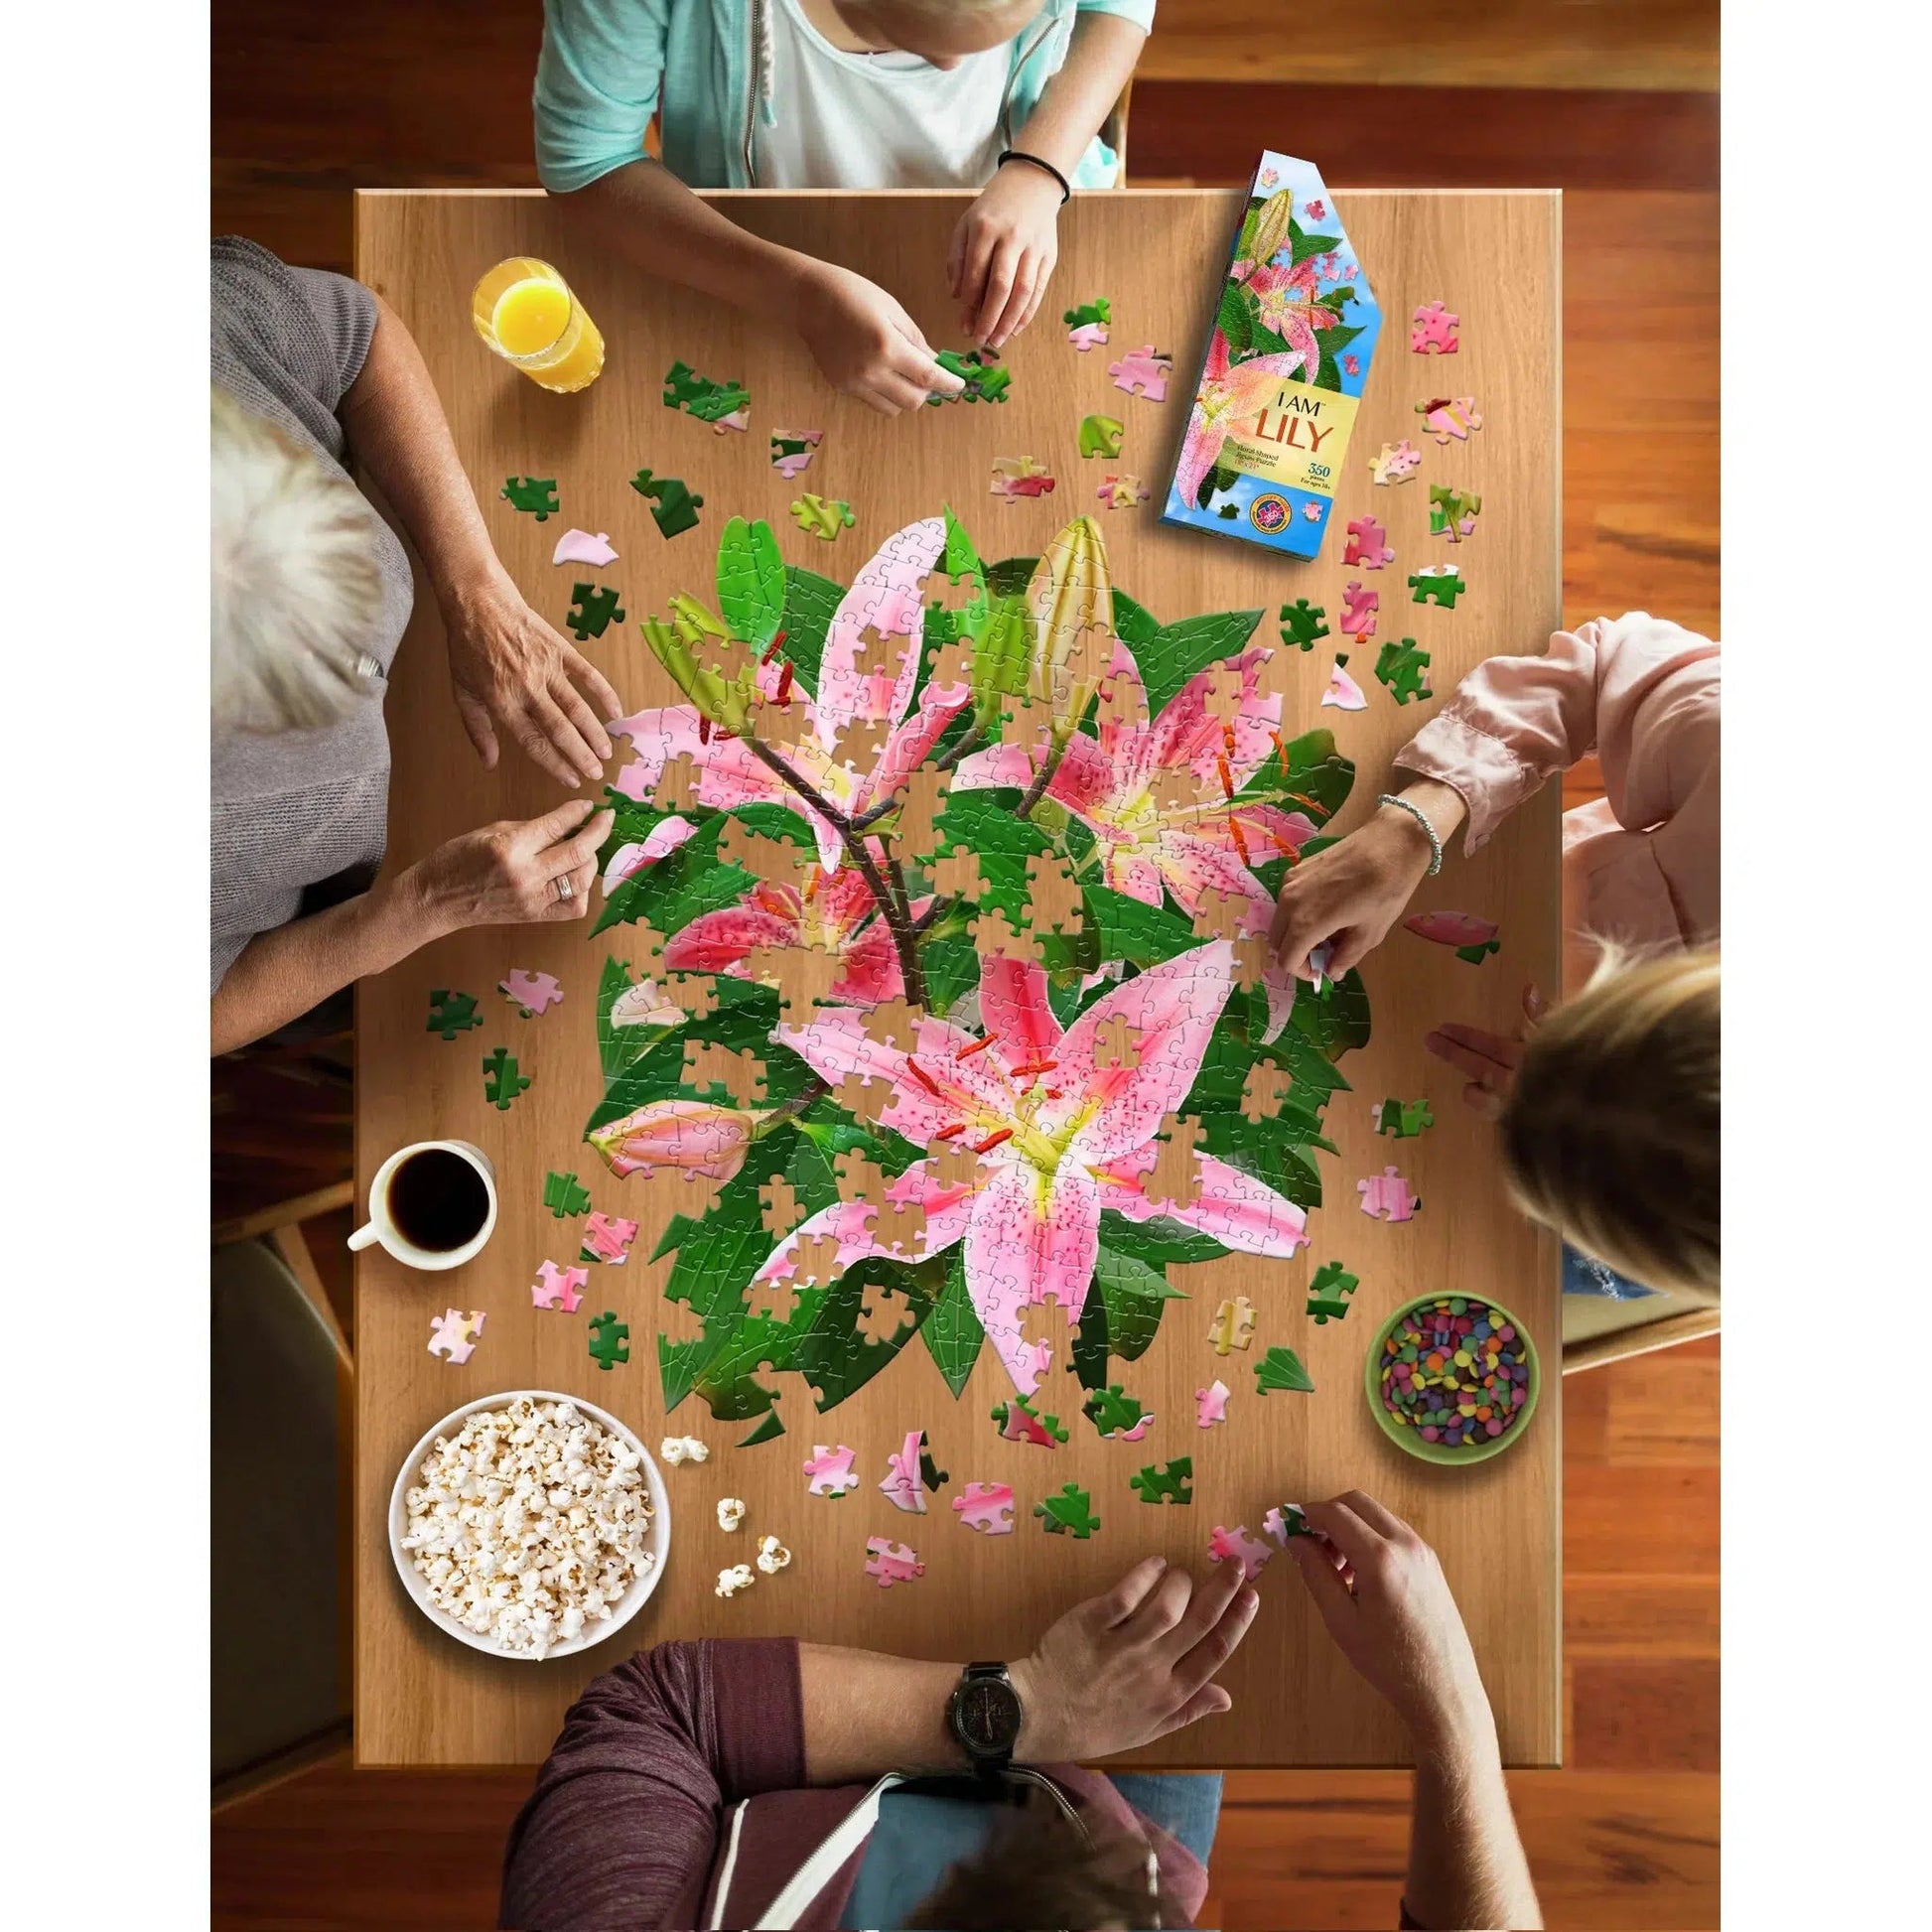 I Am Lily 350 Piece Floral Shaped Jigsaw Puzzle Madd Capp